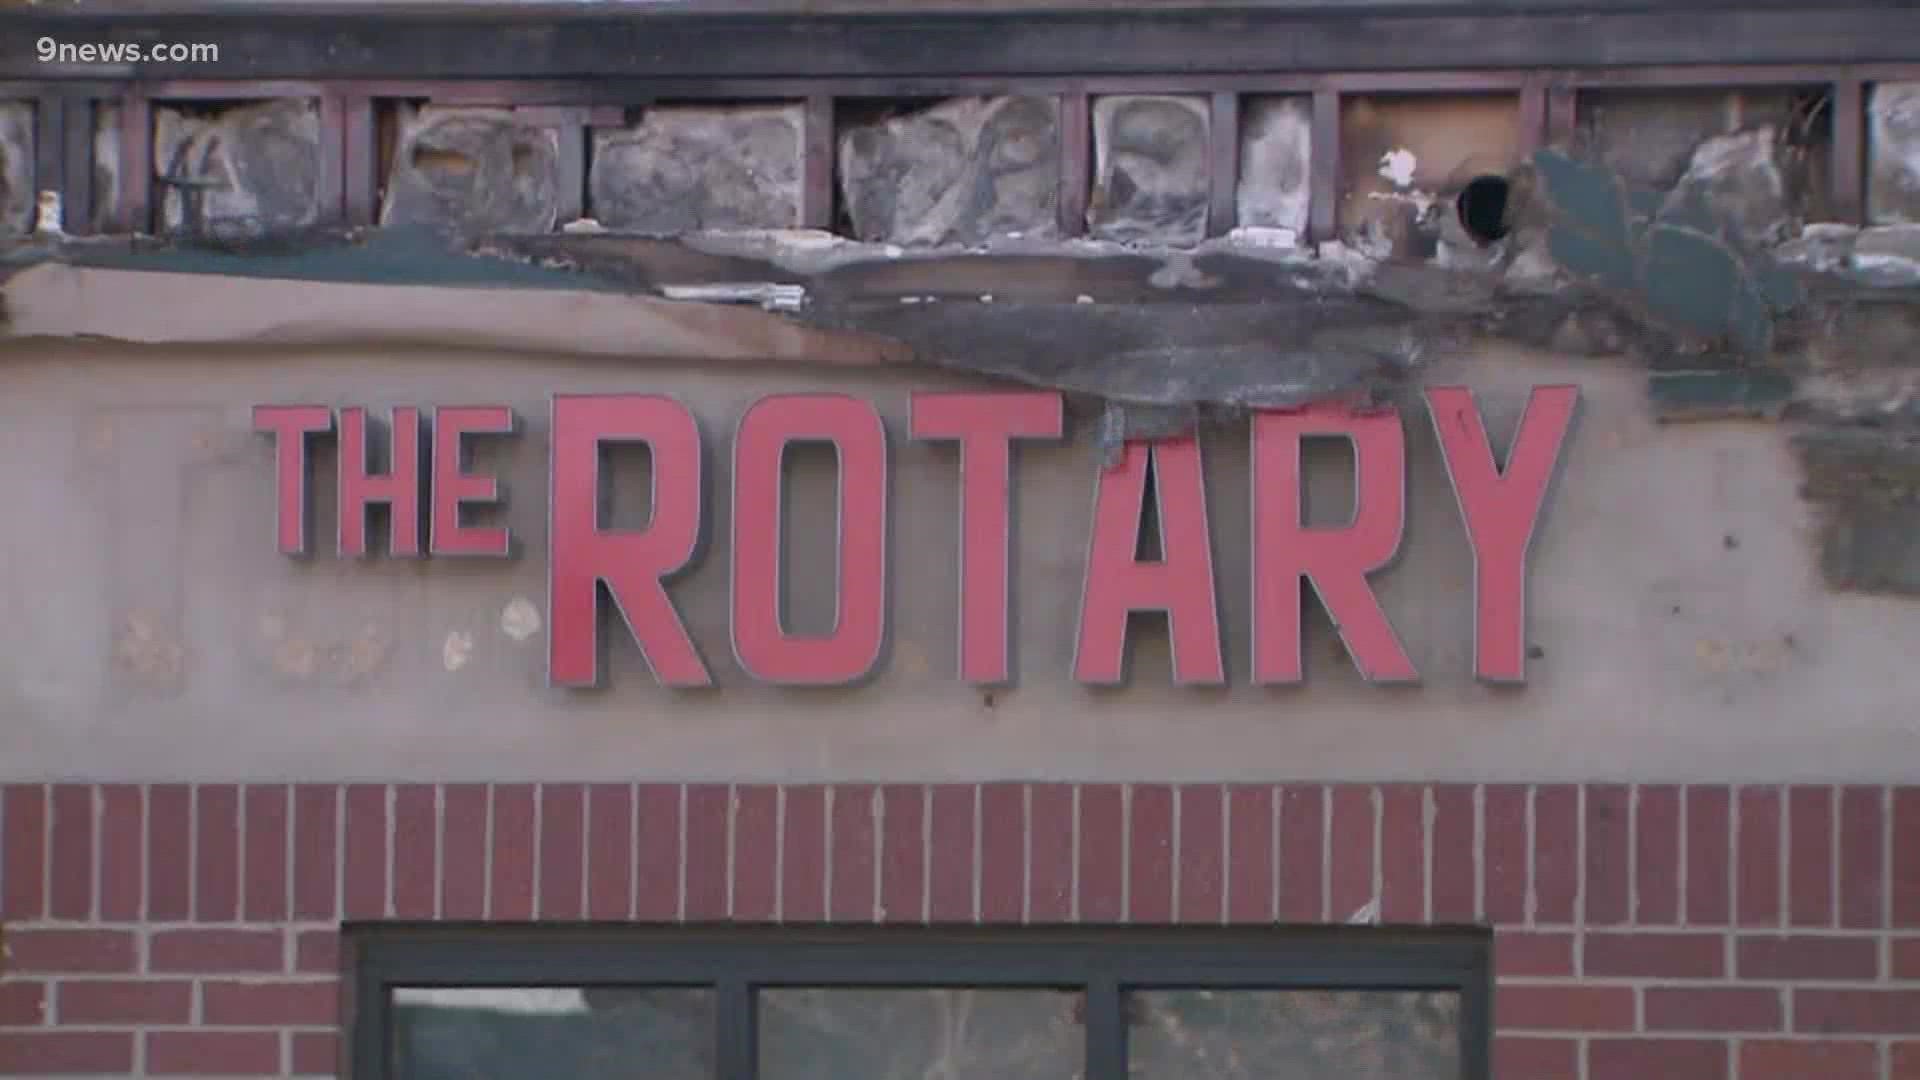 Scott Boyd owns the Rotary, a restaurant that opened just a few weeks ago in Louisville. While his home was spared by the Marshall Fire, his business was not.